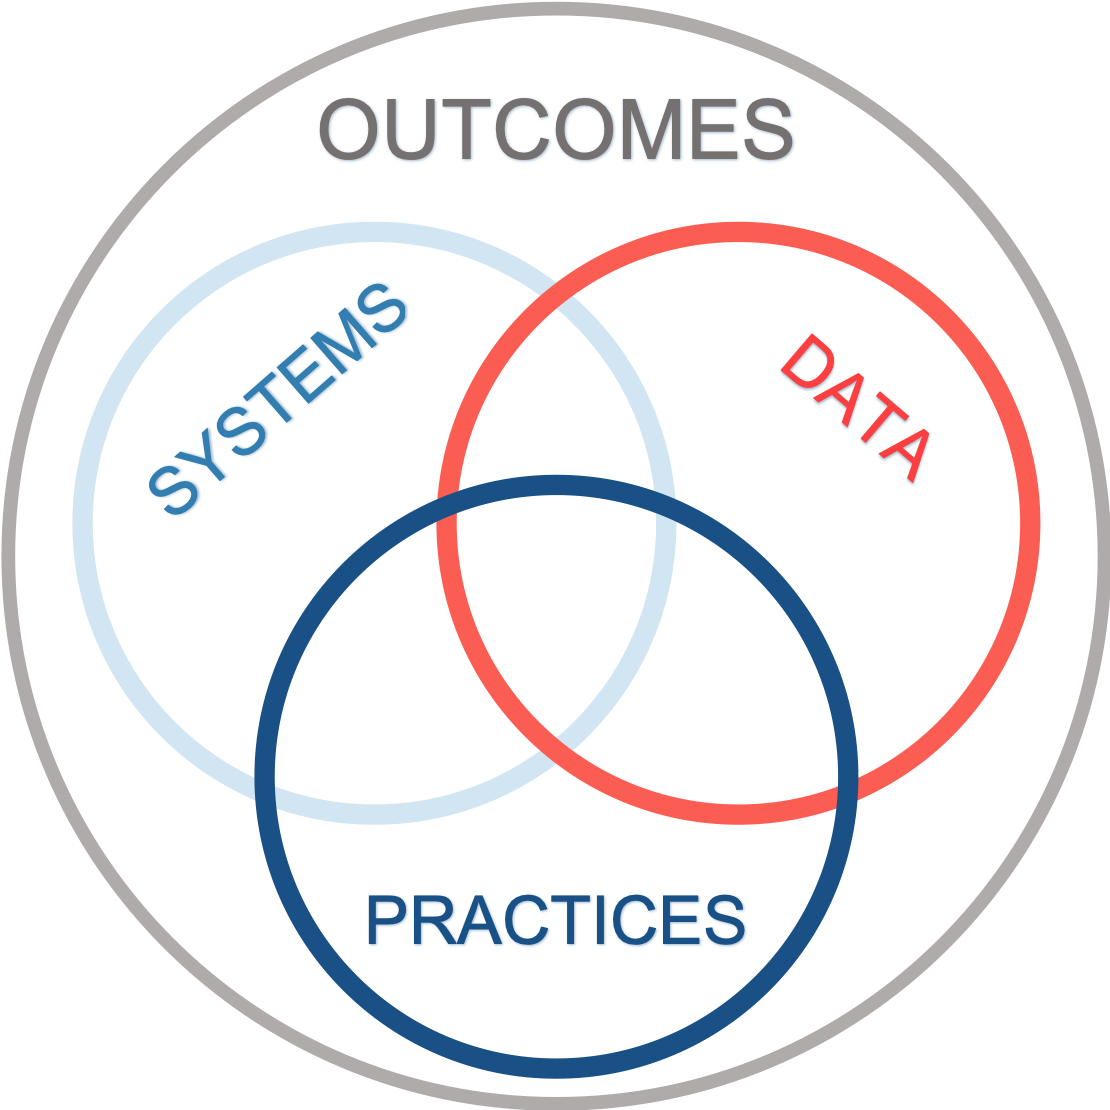 mtss "tattoo" of practices, data, and systems interlocking to support outcomes for all students